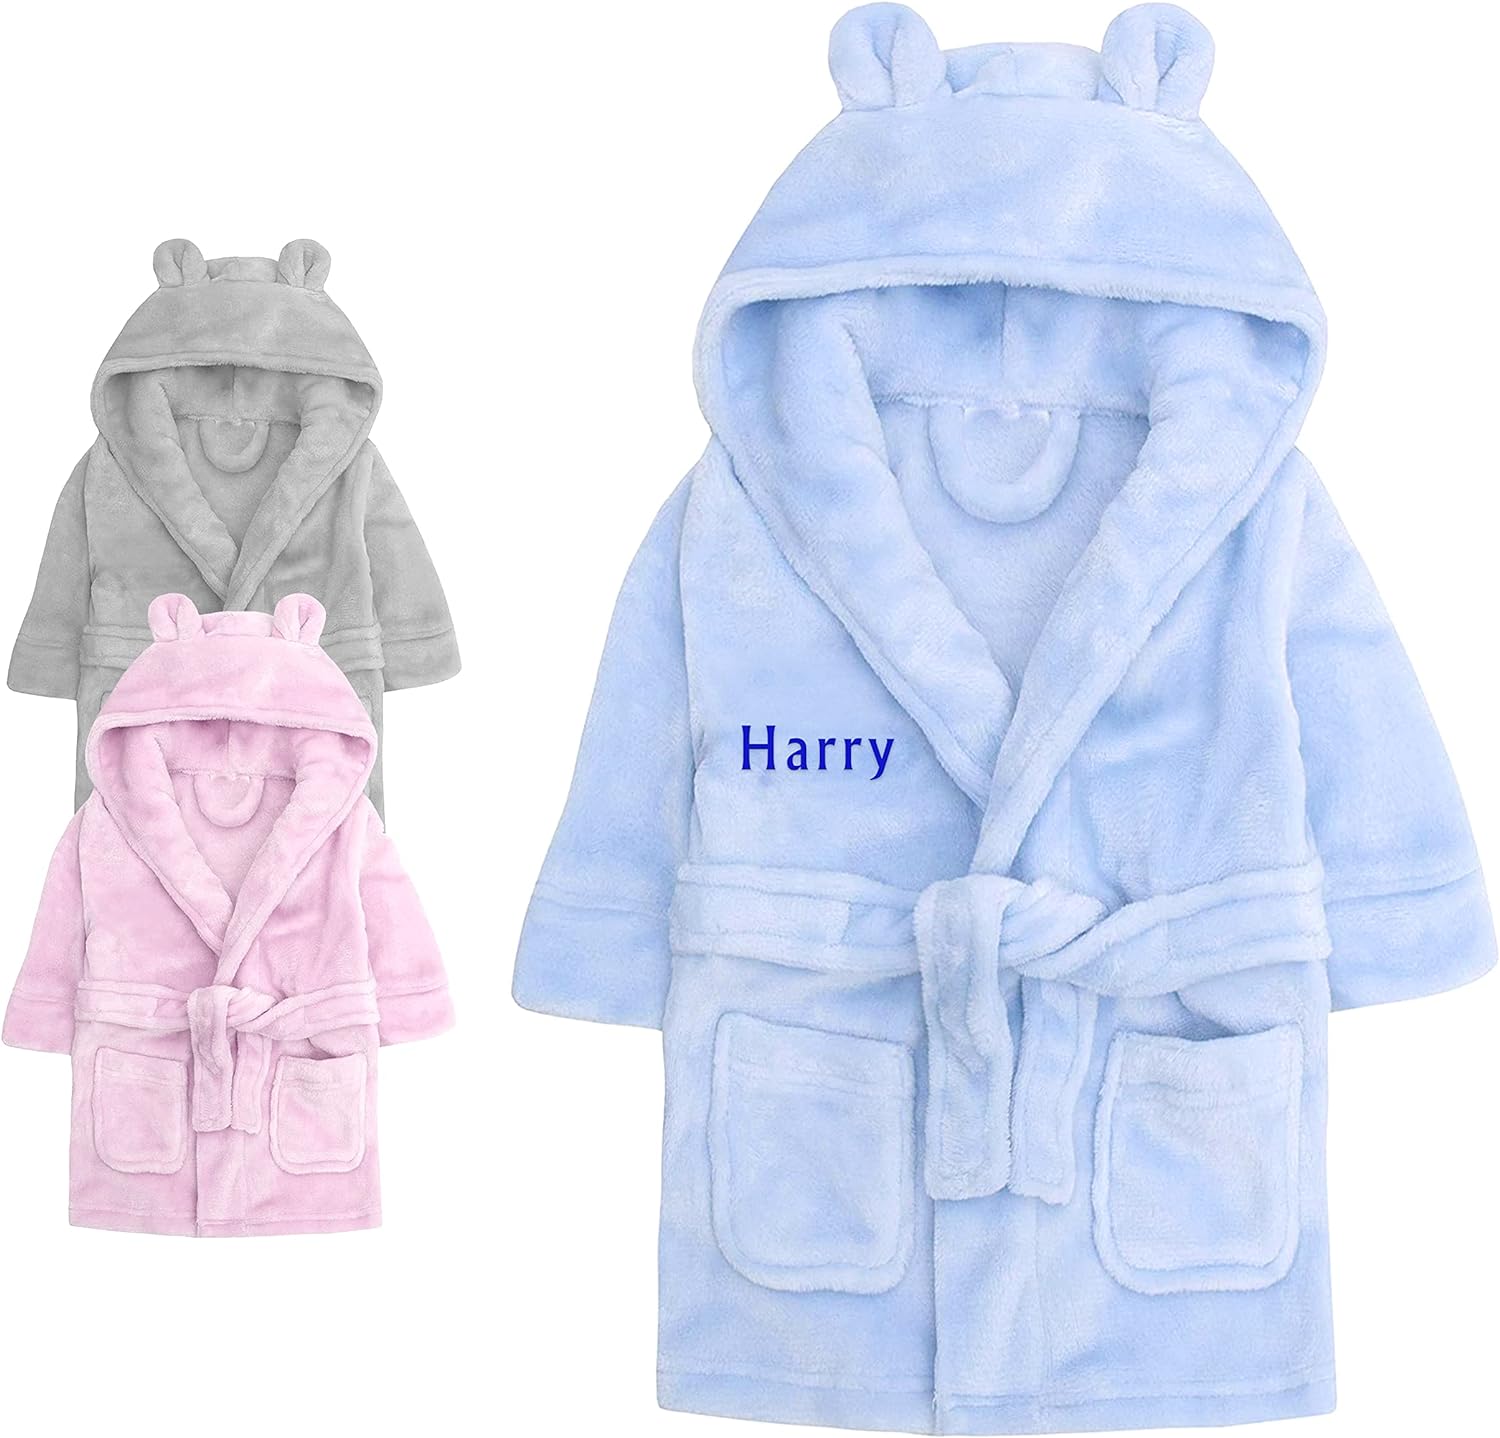 Varsany Personalised Baby Shower Robe Dressing Gown Gift Newborn Baby Clothes Boy Girl Bath Robe Pink/Blue/Grey Gifts Teddy Ears Embroidery Rhinestone 0-24 Months